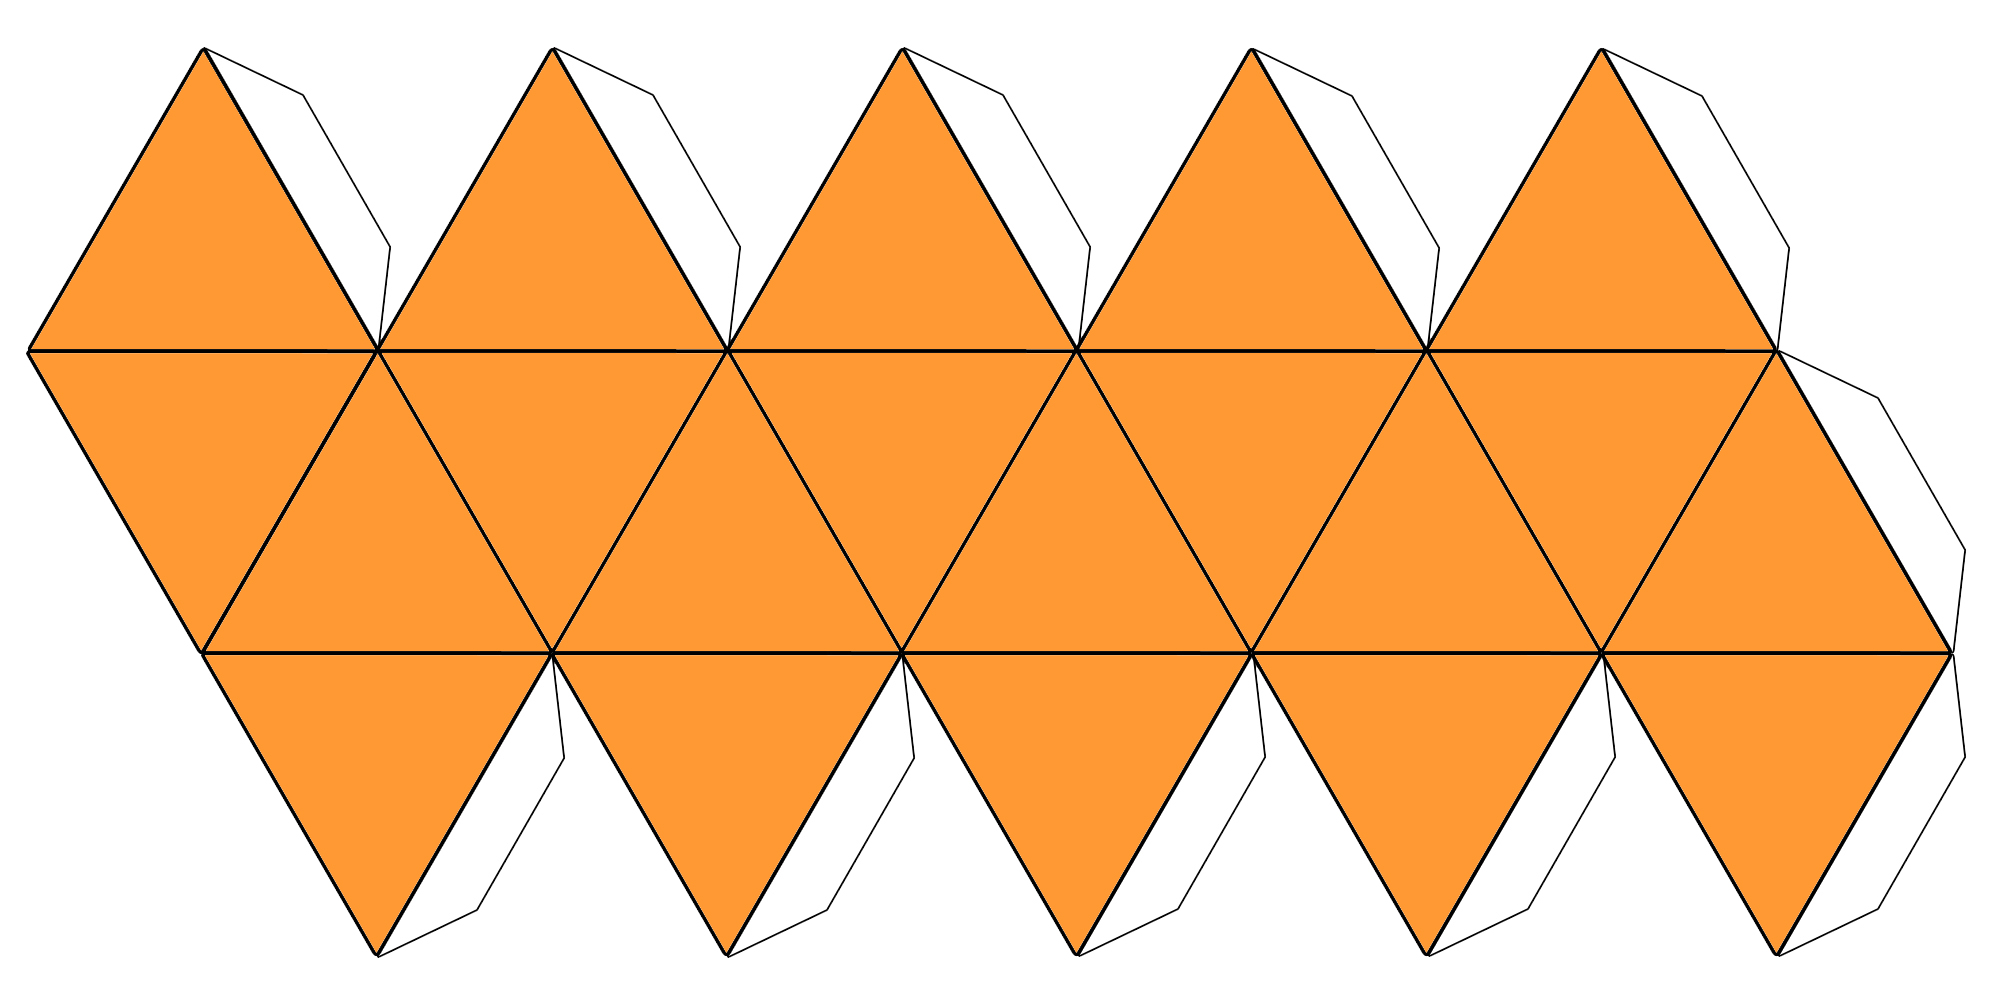 Icosahedron Template Printable Instructions